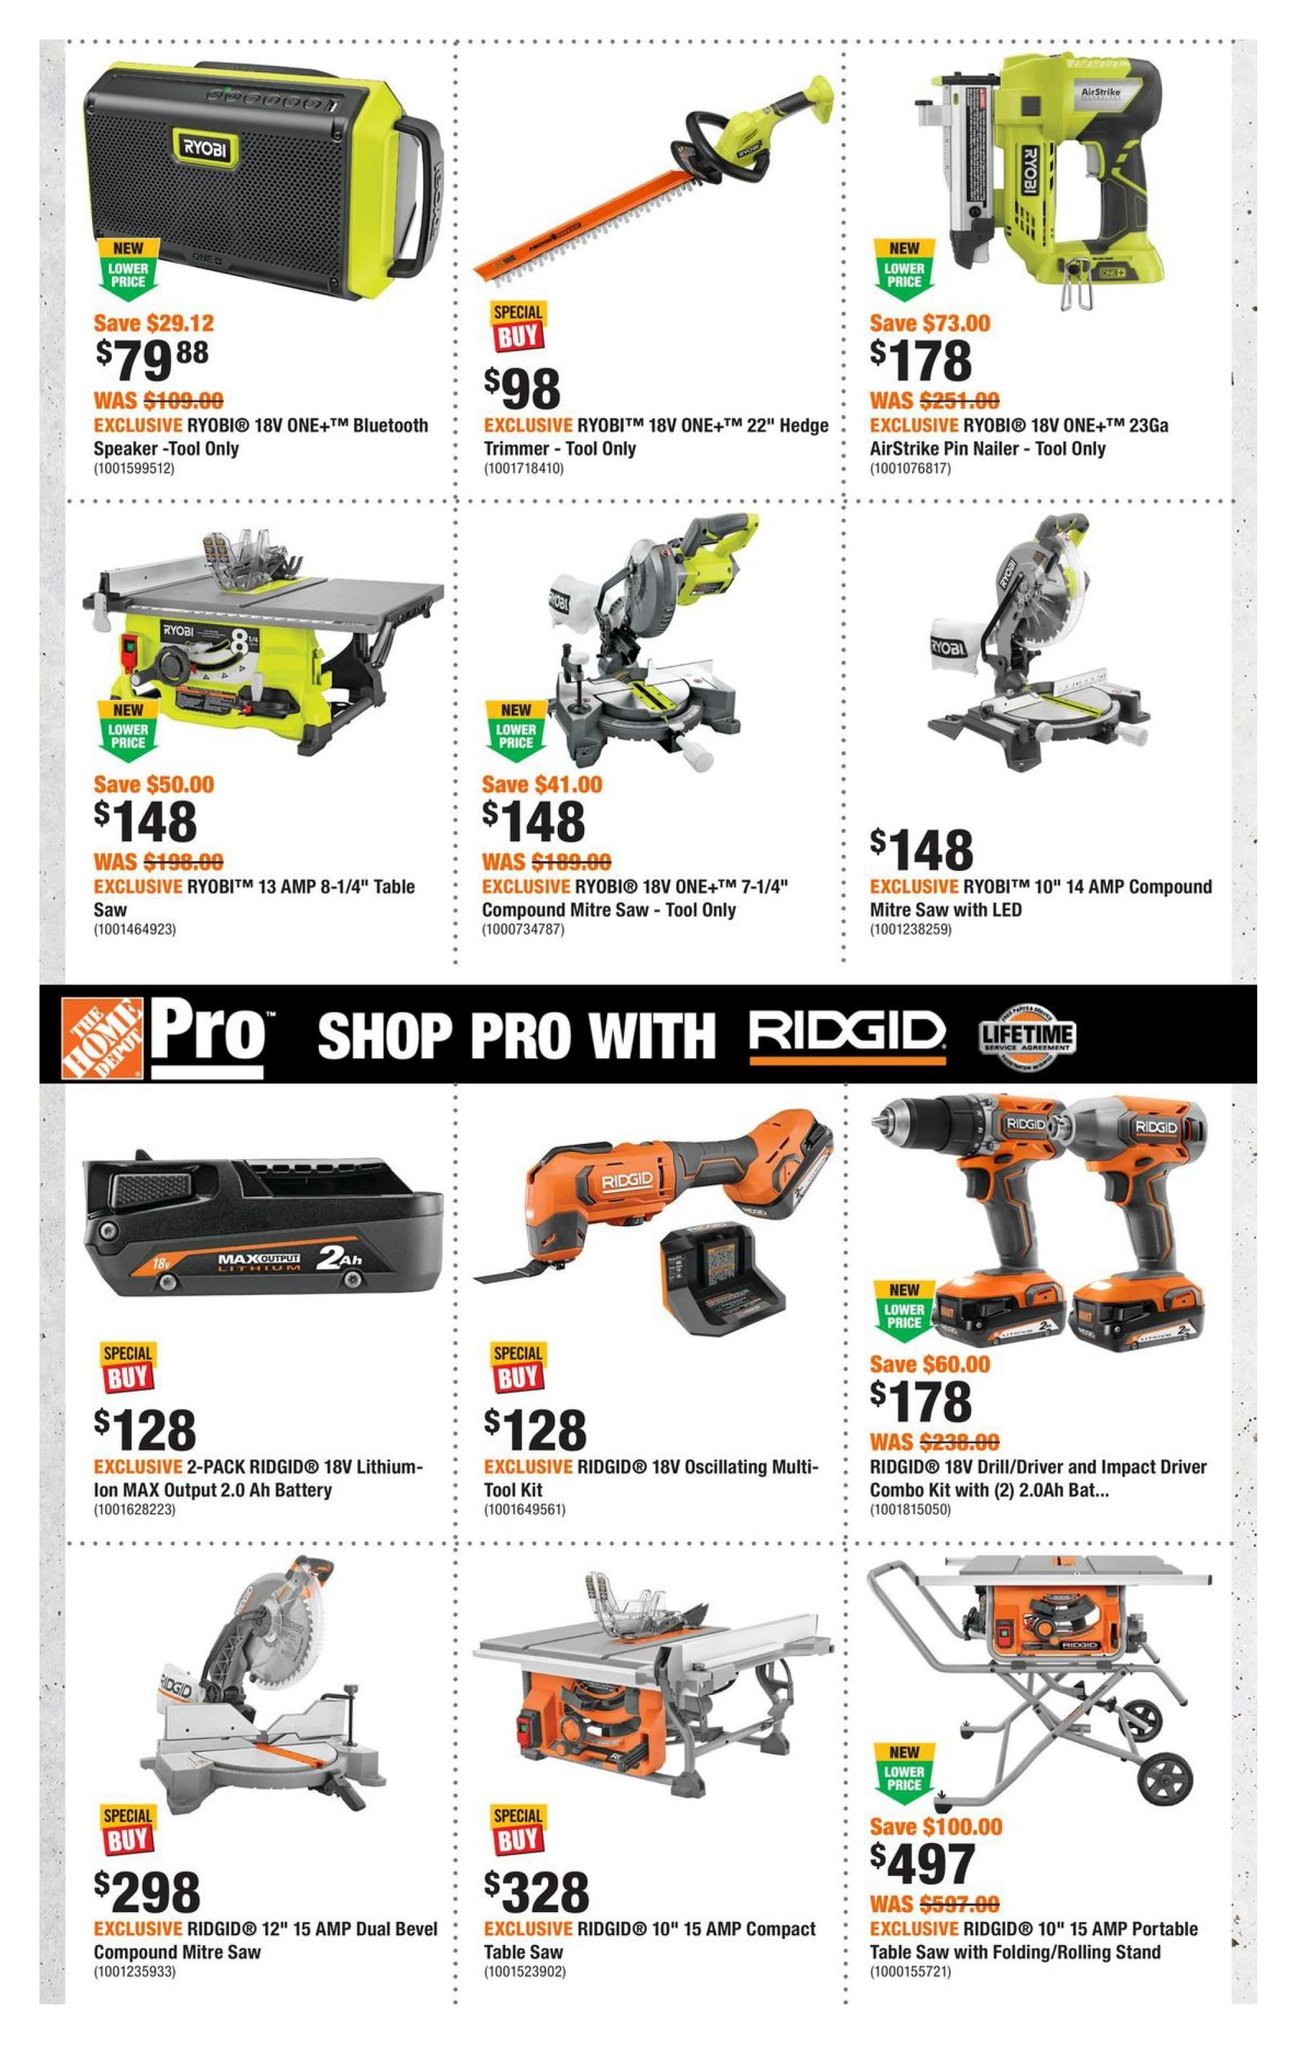 Home Depot - Father's Day Gift Guide - Page 5